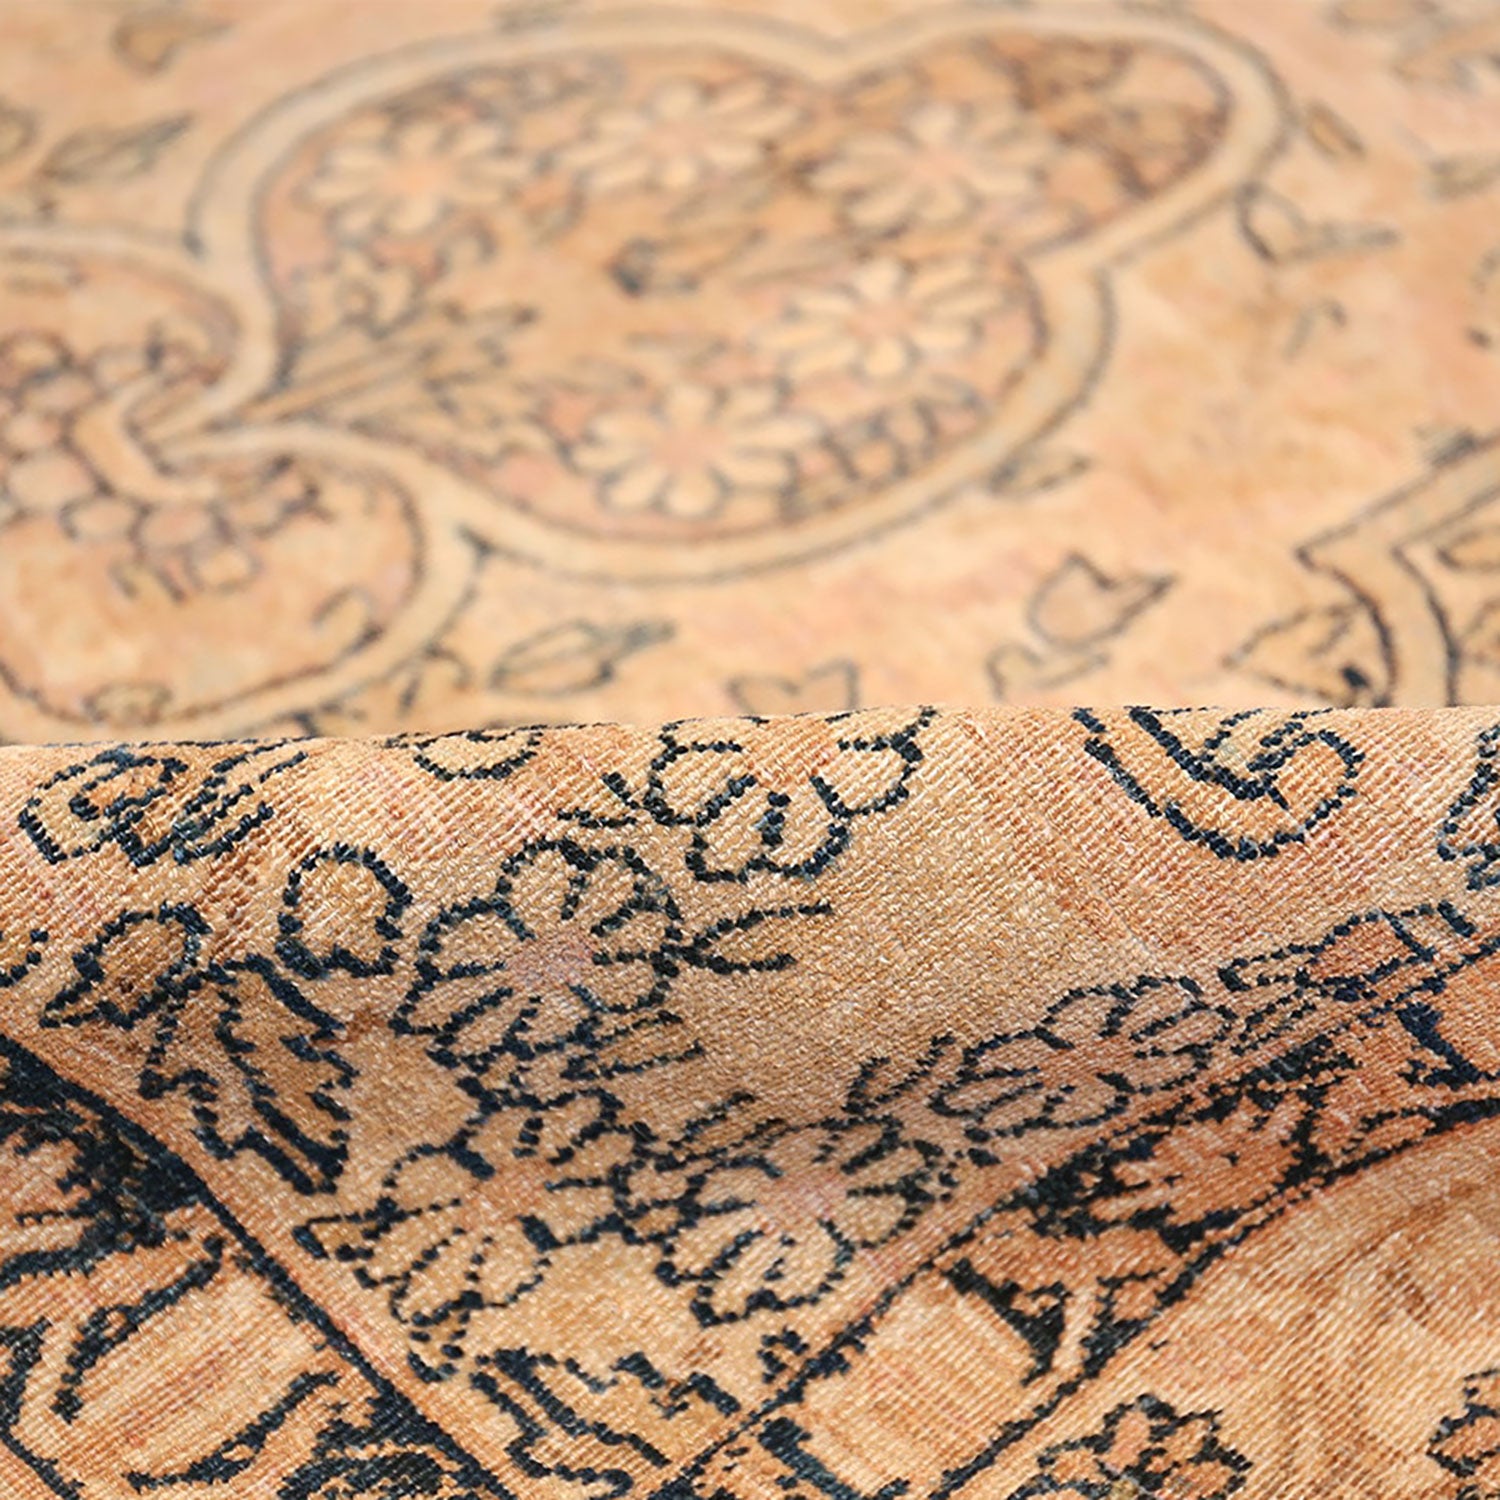 Close-up of a rolled-up patterned carpet with intricate floral design.